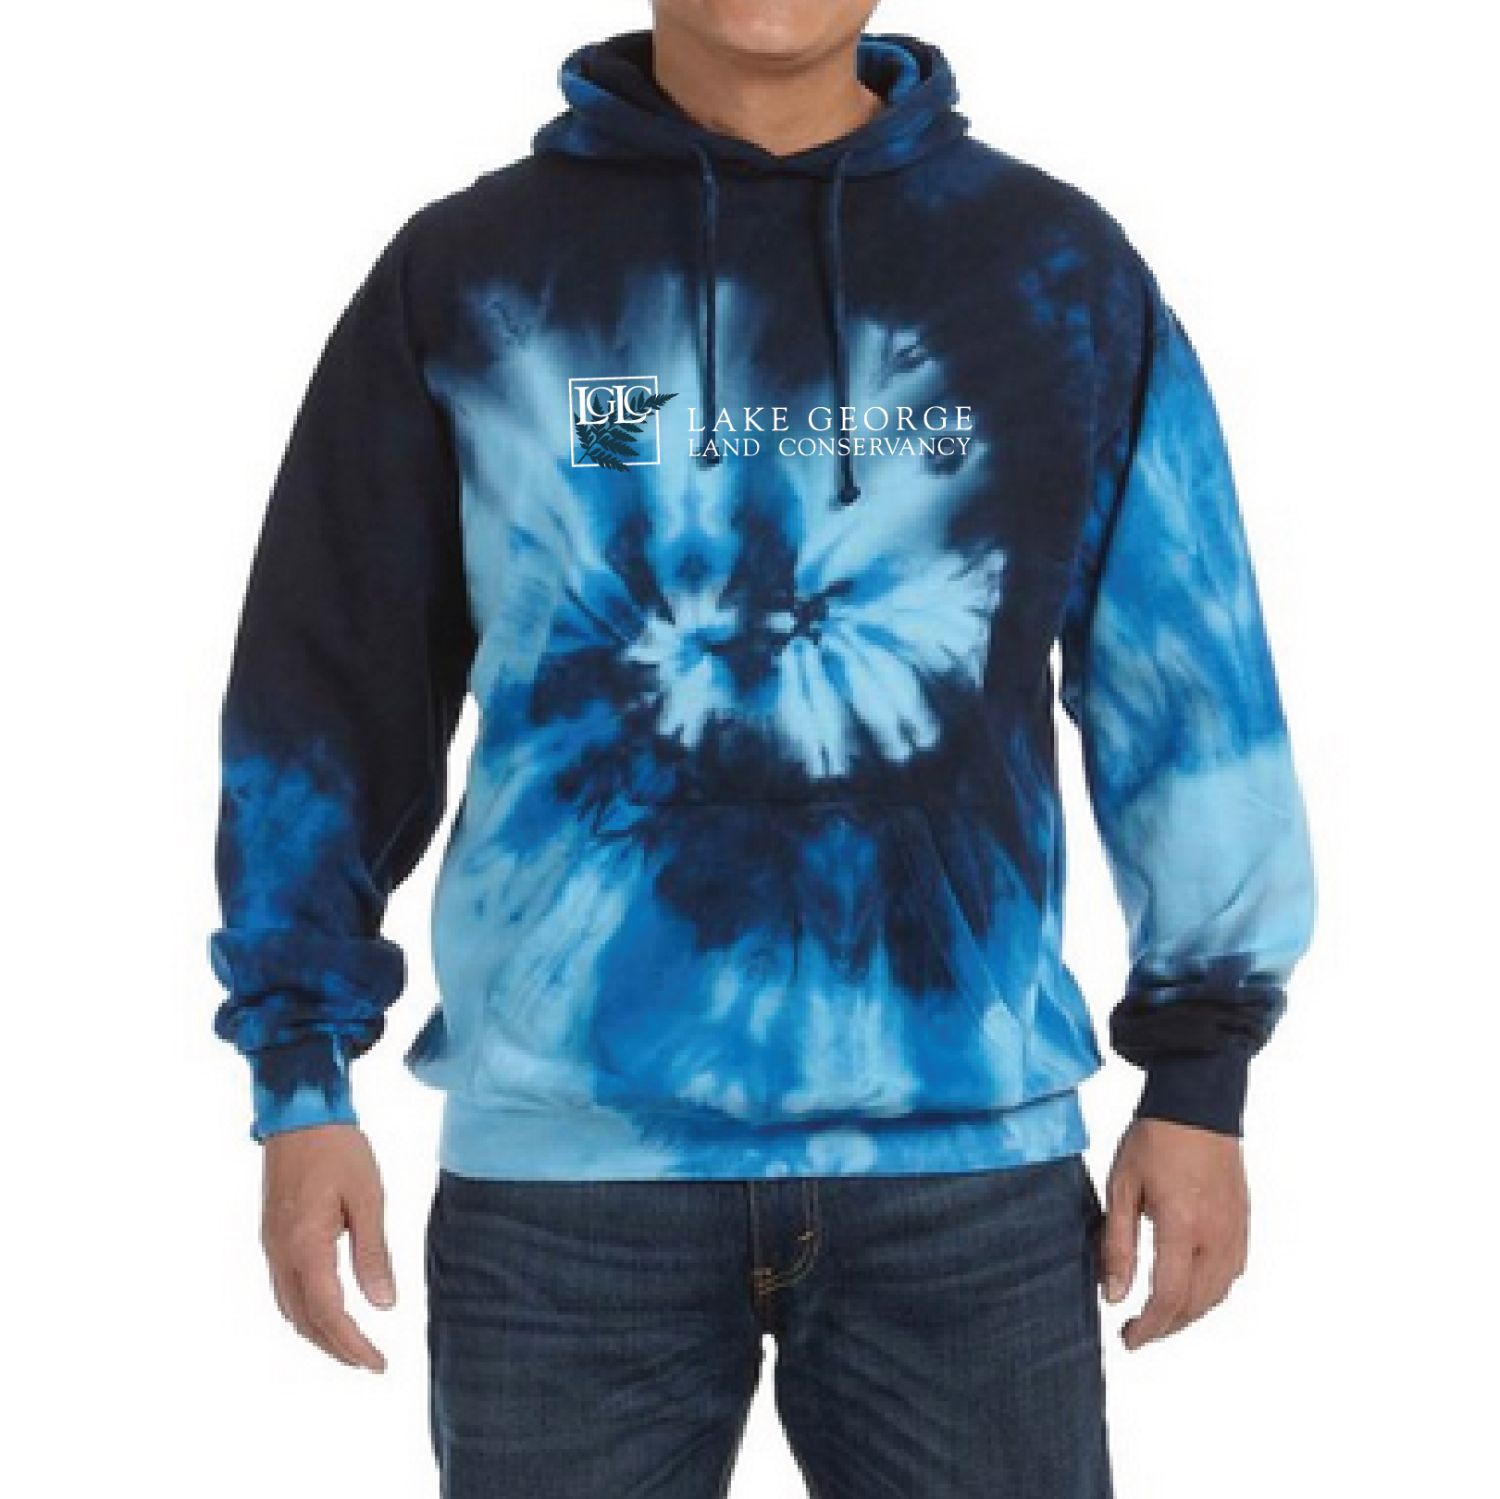 a man is modeling a tie-dye hooded sweatshirt colored in multiple shades of blue. The LGLC logo is screen printed on the front in white.